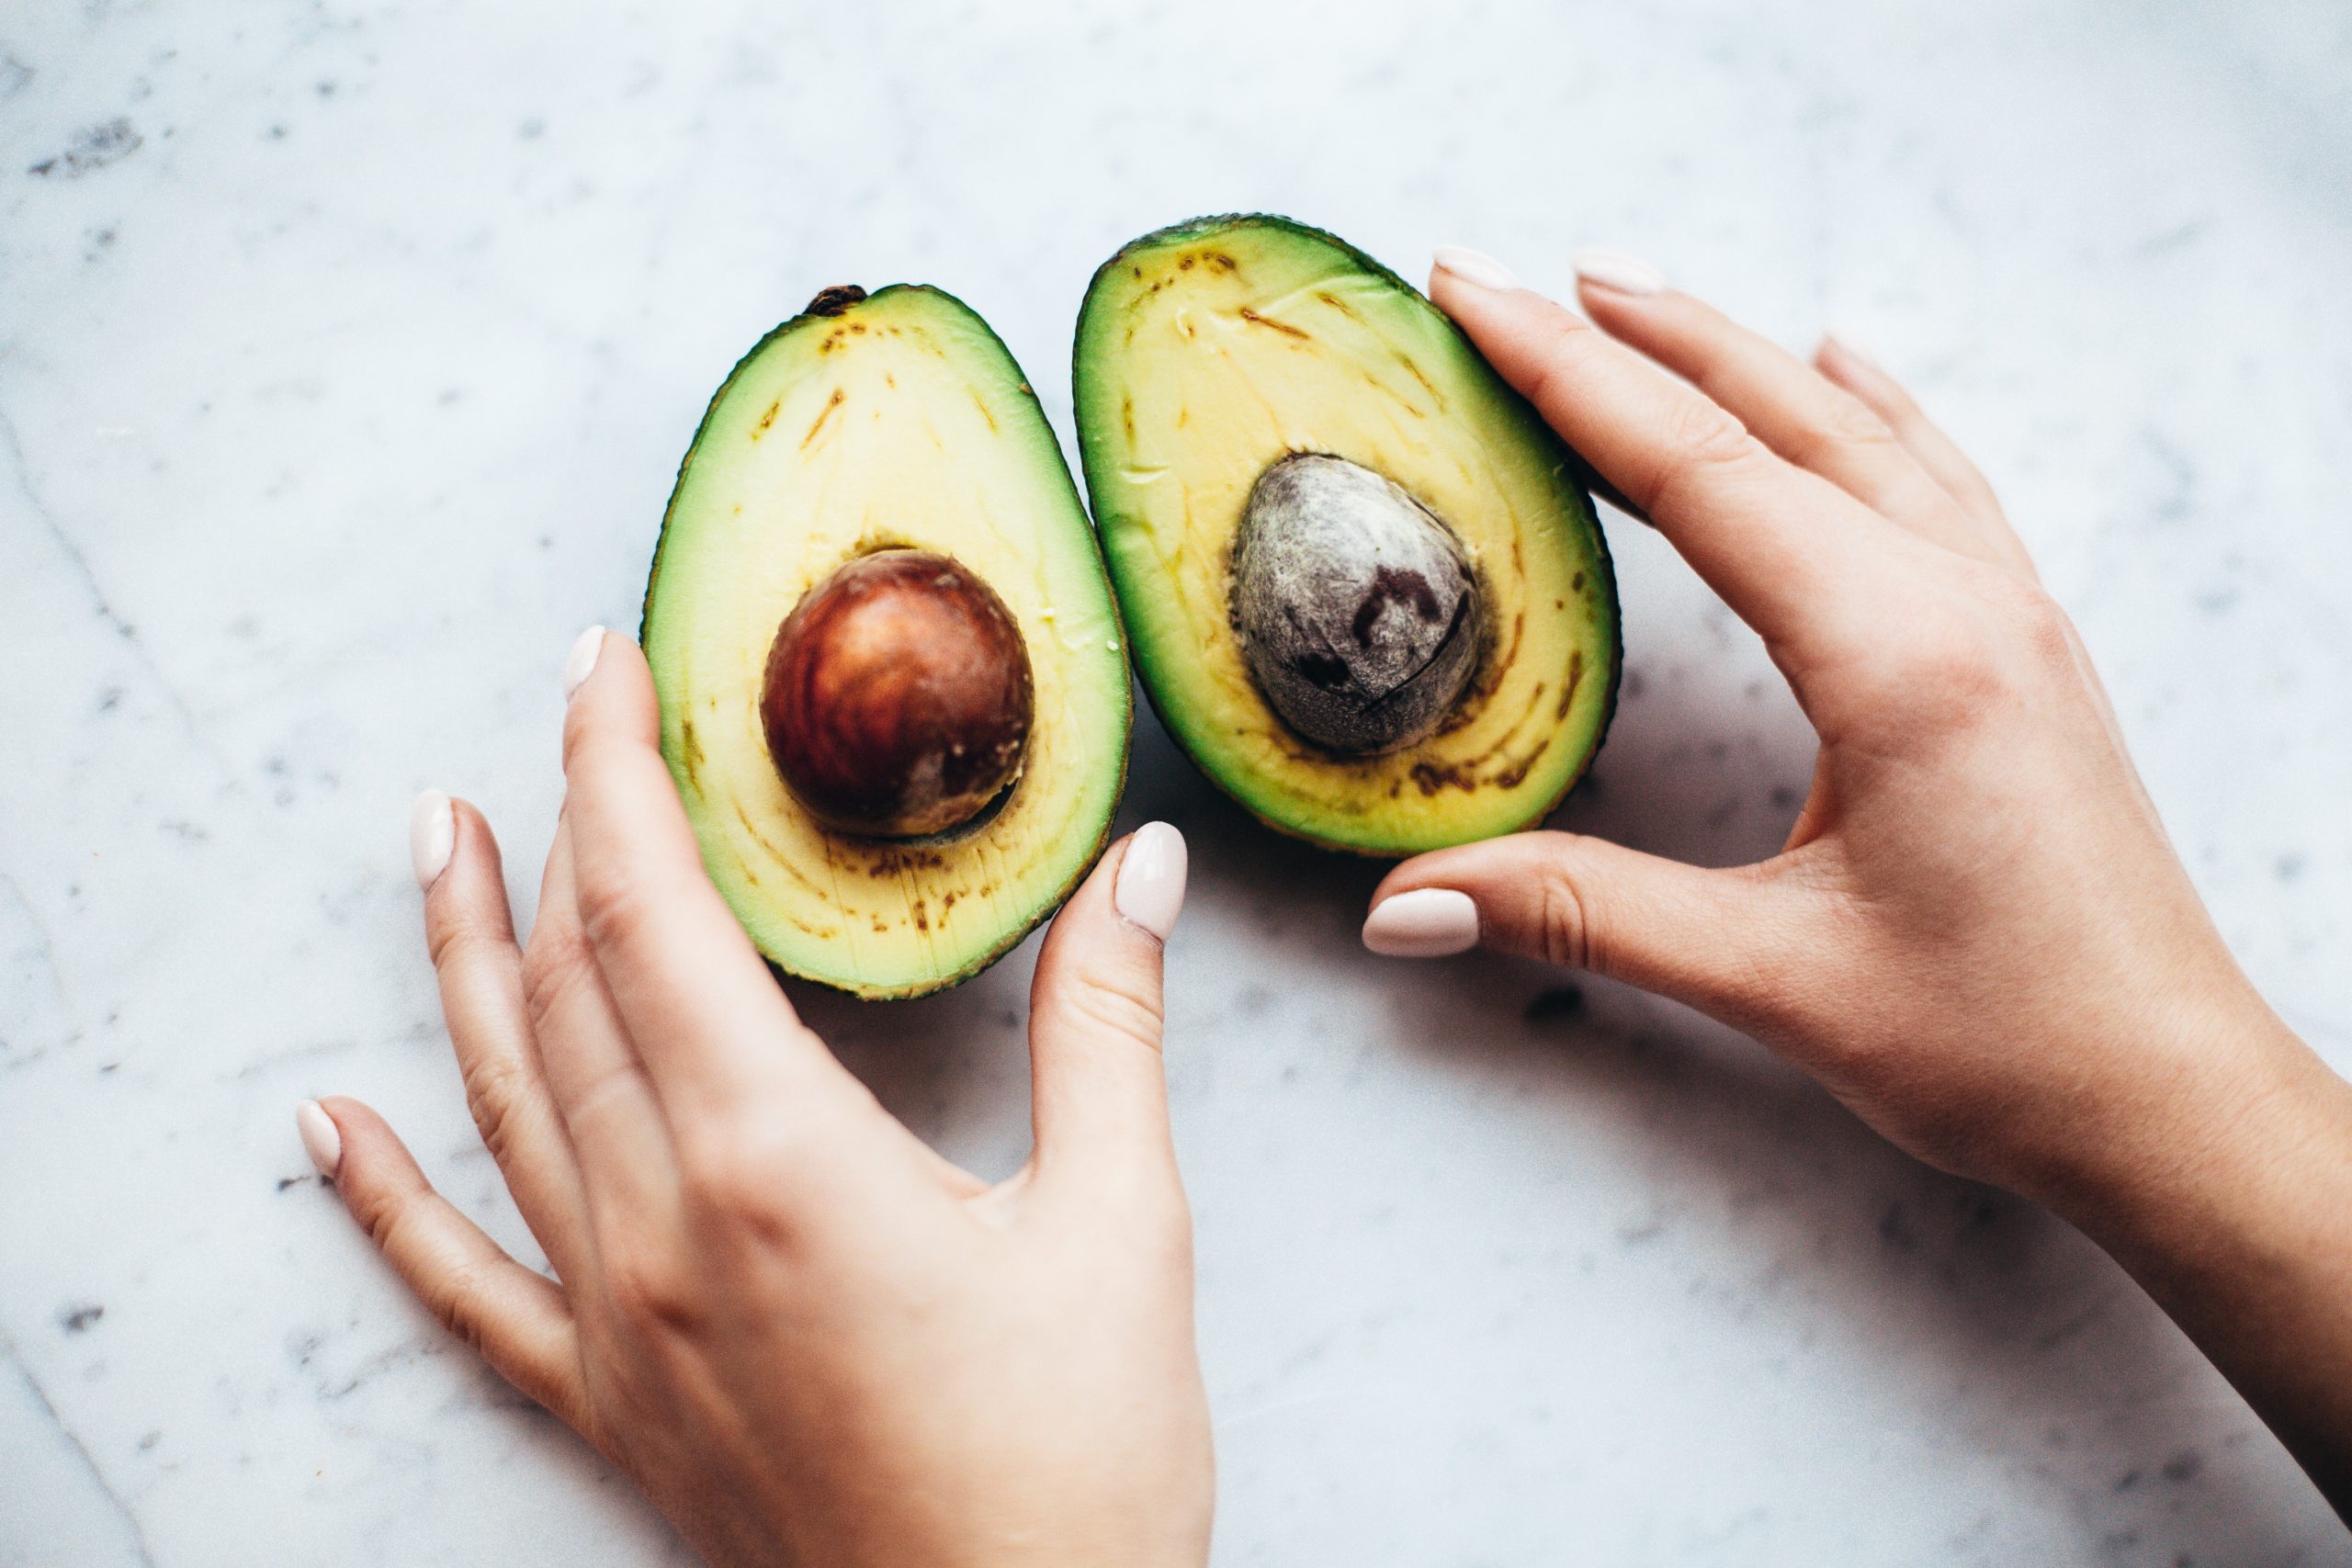 Avocado cut in half. Avocados are a great source of healthy fats but can be high in calories. Image from Pexels.